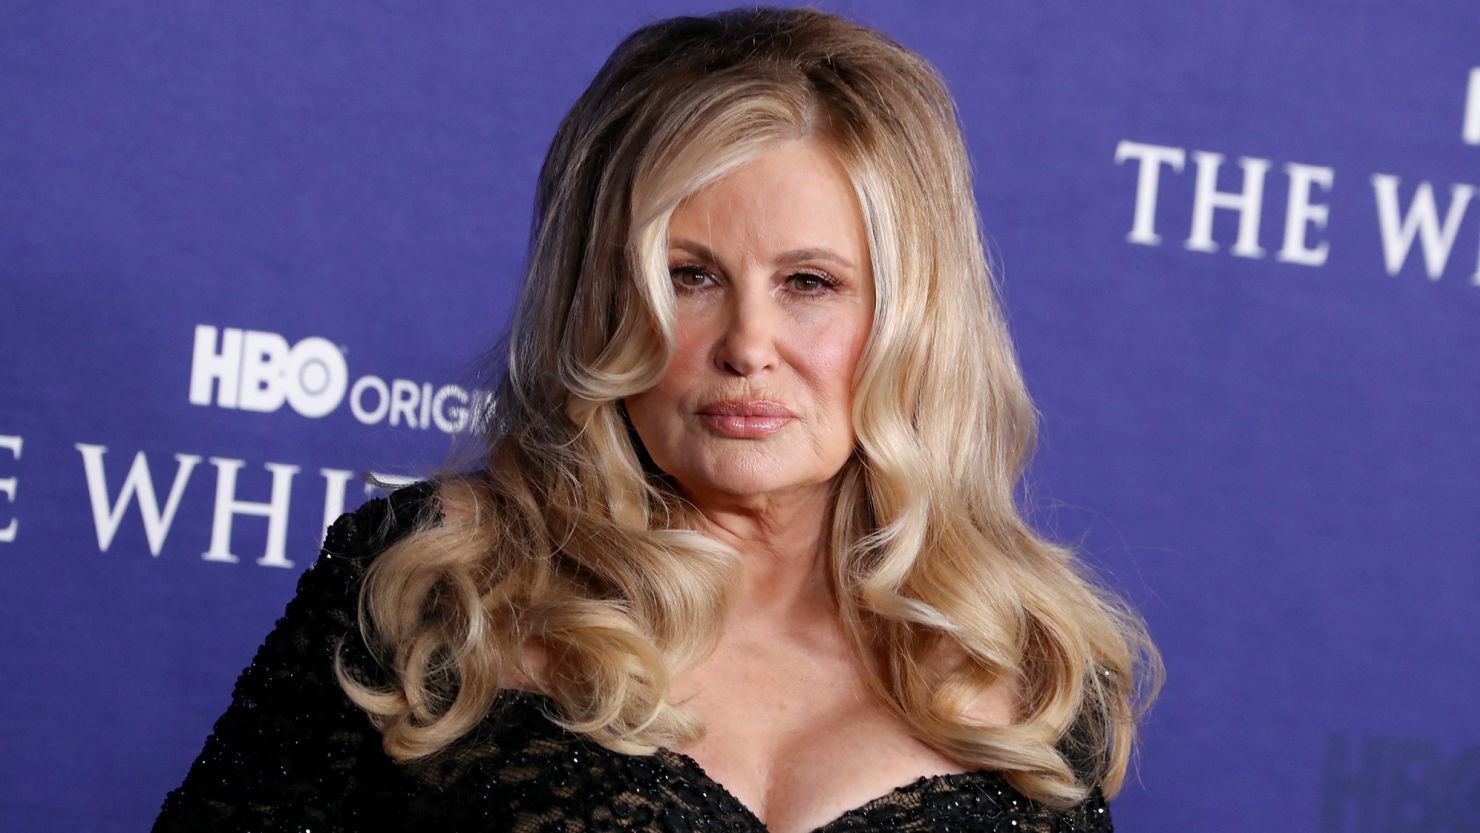 Jennifer Coolidge attends "The White Lotus" Season 2 premiere in Los Angeles on Oct. 22.